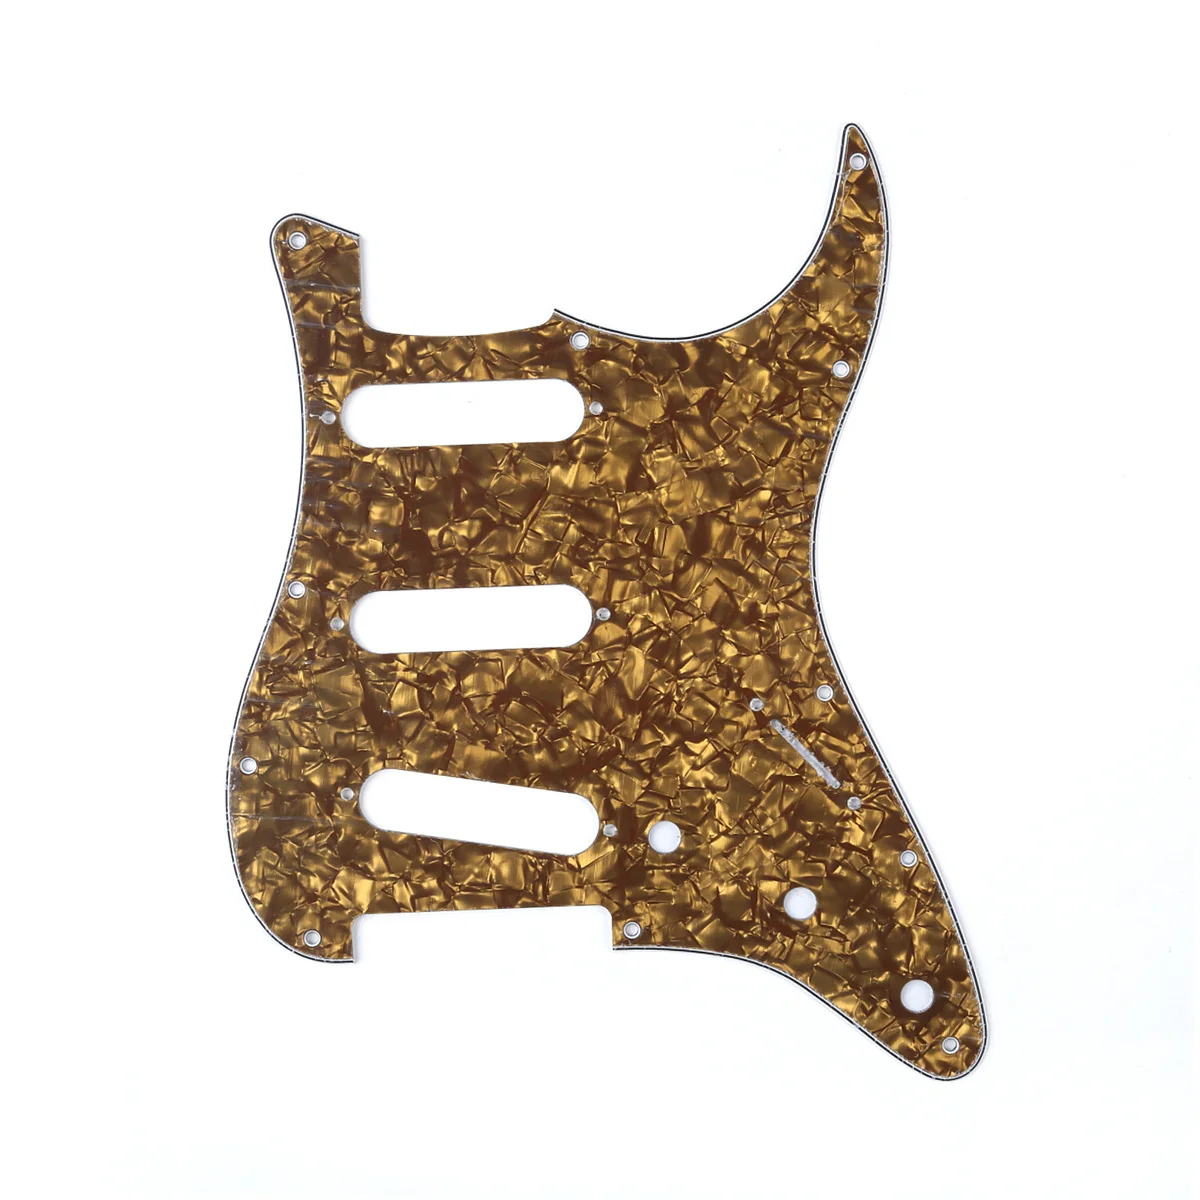 

Musiclily SSS 11 Hole Strat Guitar Pickguard for Fender USA/Mexican Made Standard Stratocaster Style, 4Ply Bronze Pearl